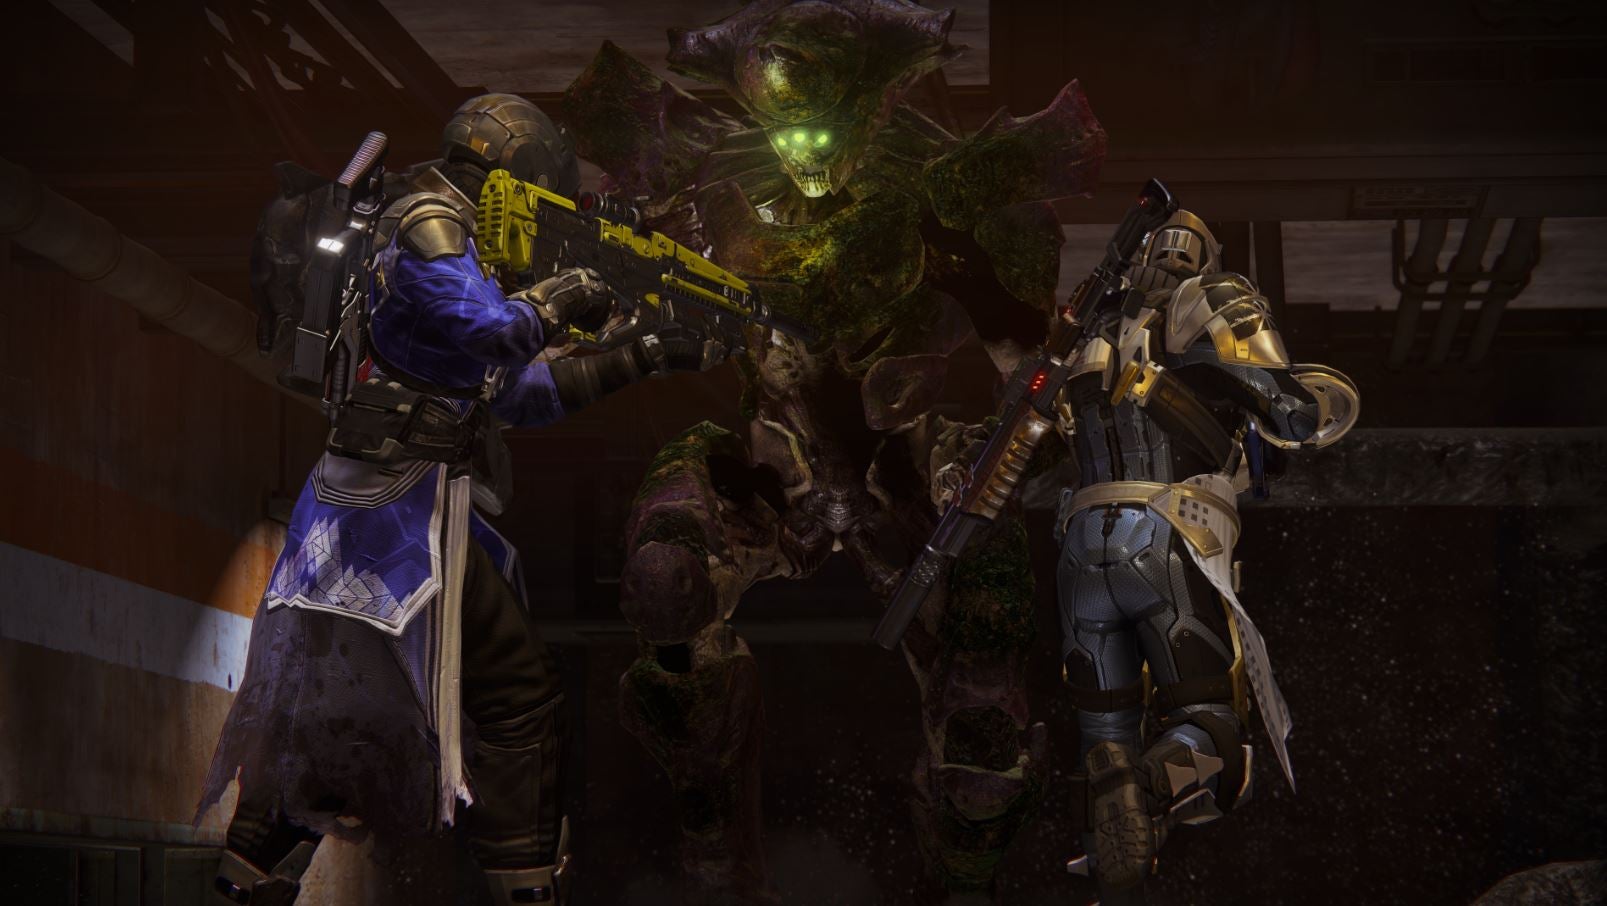 I Played 45 Minutes Of Destiny, And It Was Kind Of Boring